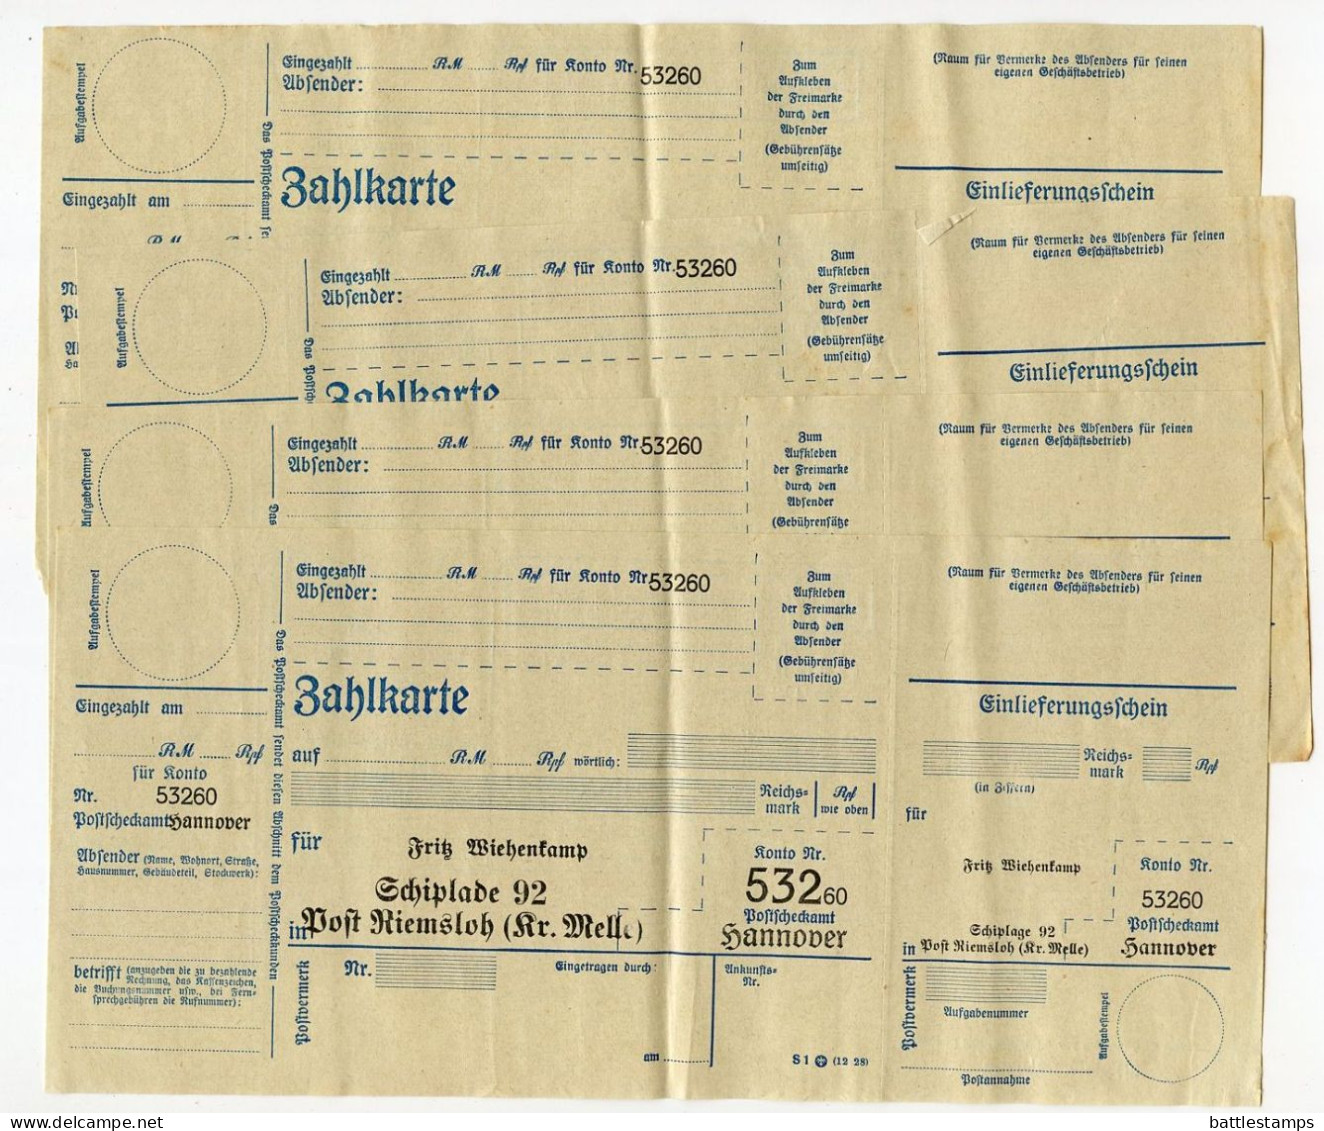 Germany 1931 Postscheckamt (Postal Check Office) Cover; Hannover to Schiplage; 18 Zahlkartes (Payment Cards)